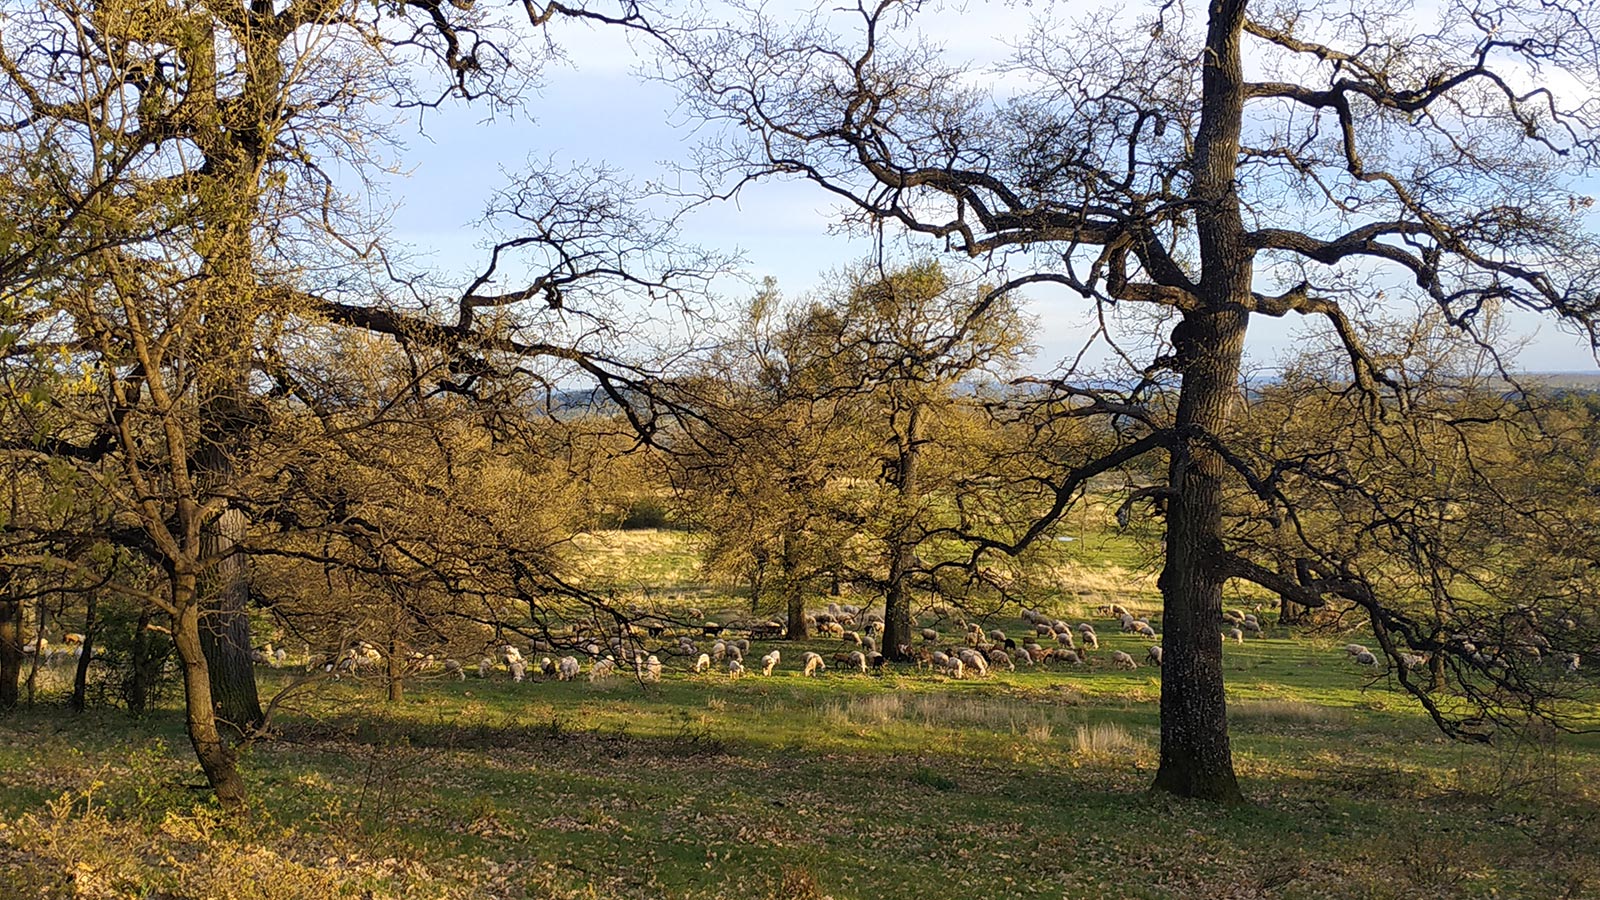 Pastures dotted with trees